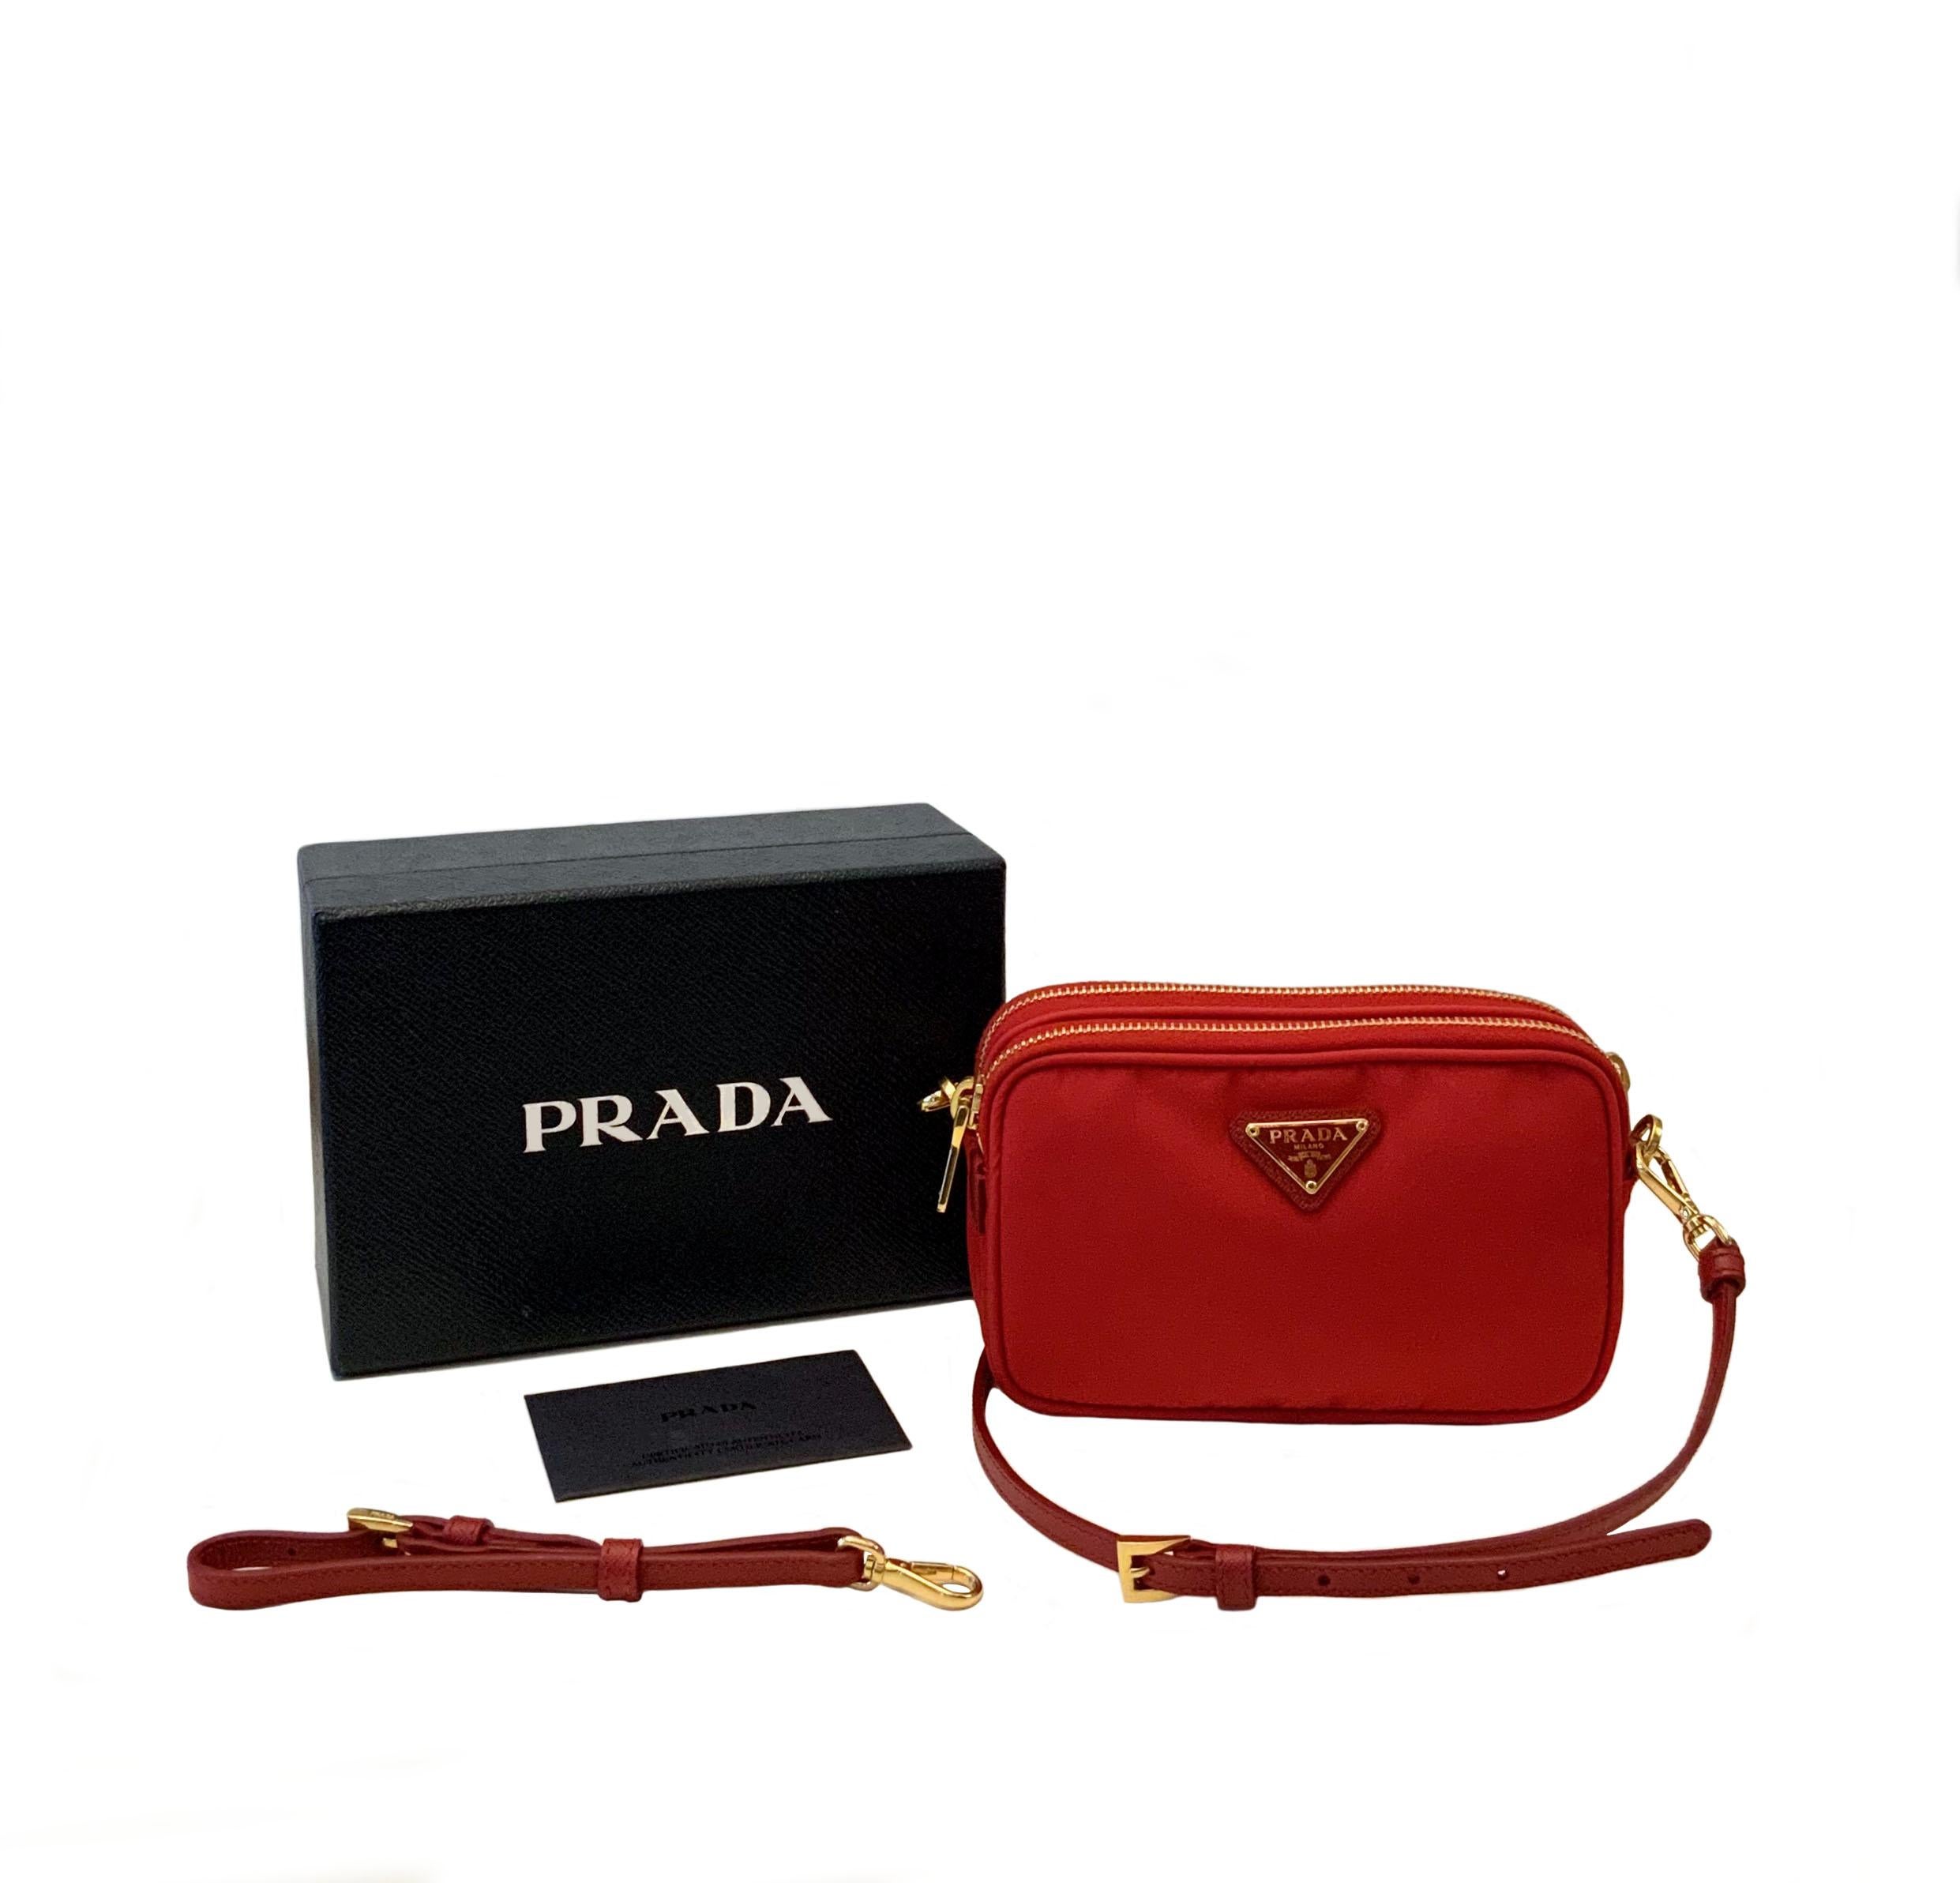 This pre-owned but new cross-body bag is crafted of Prada nylon in red. 
The bag features a long leather crossbody strap and an additional and removable single leather handle.
Two top zippers open to a red Prada monogram interior.

Material: